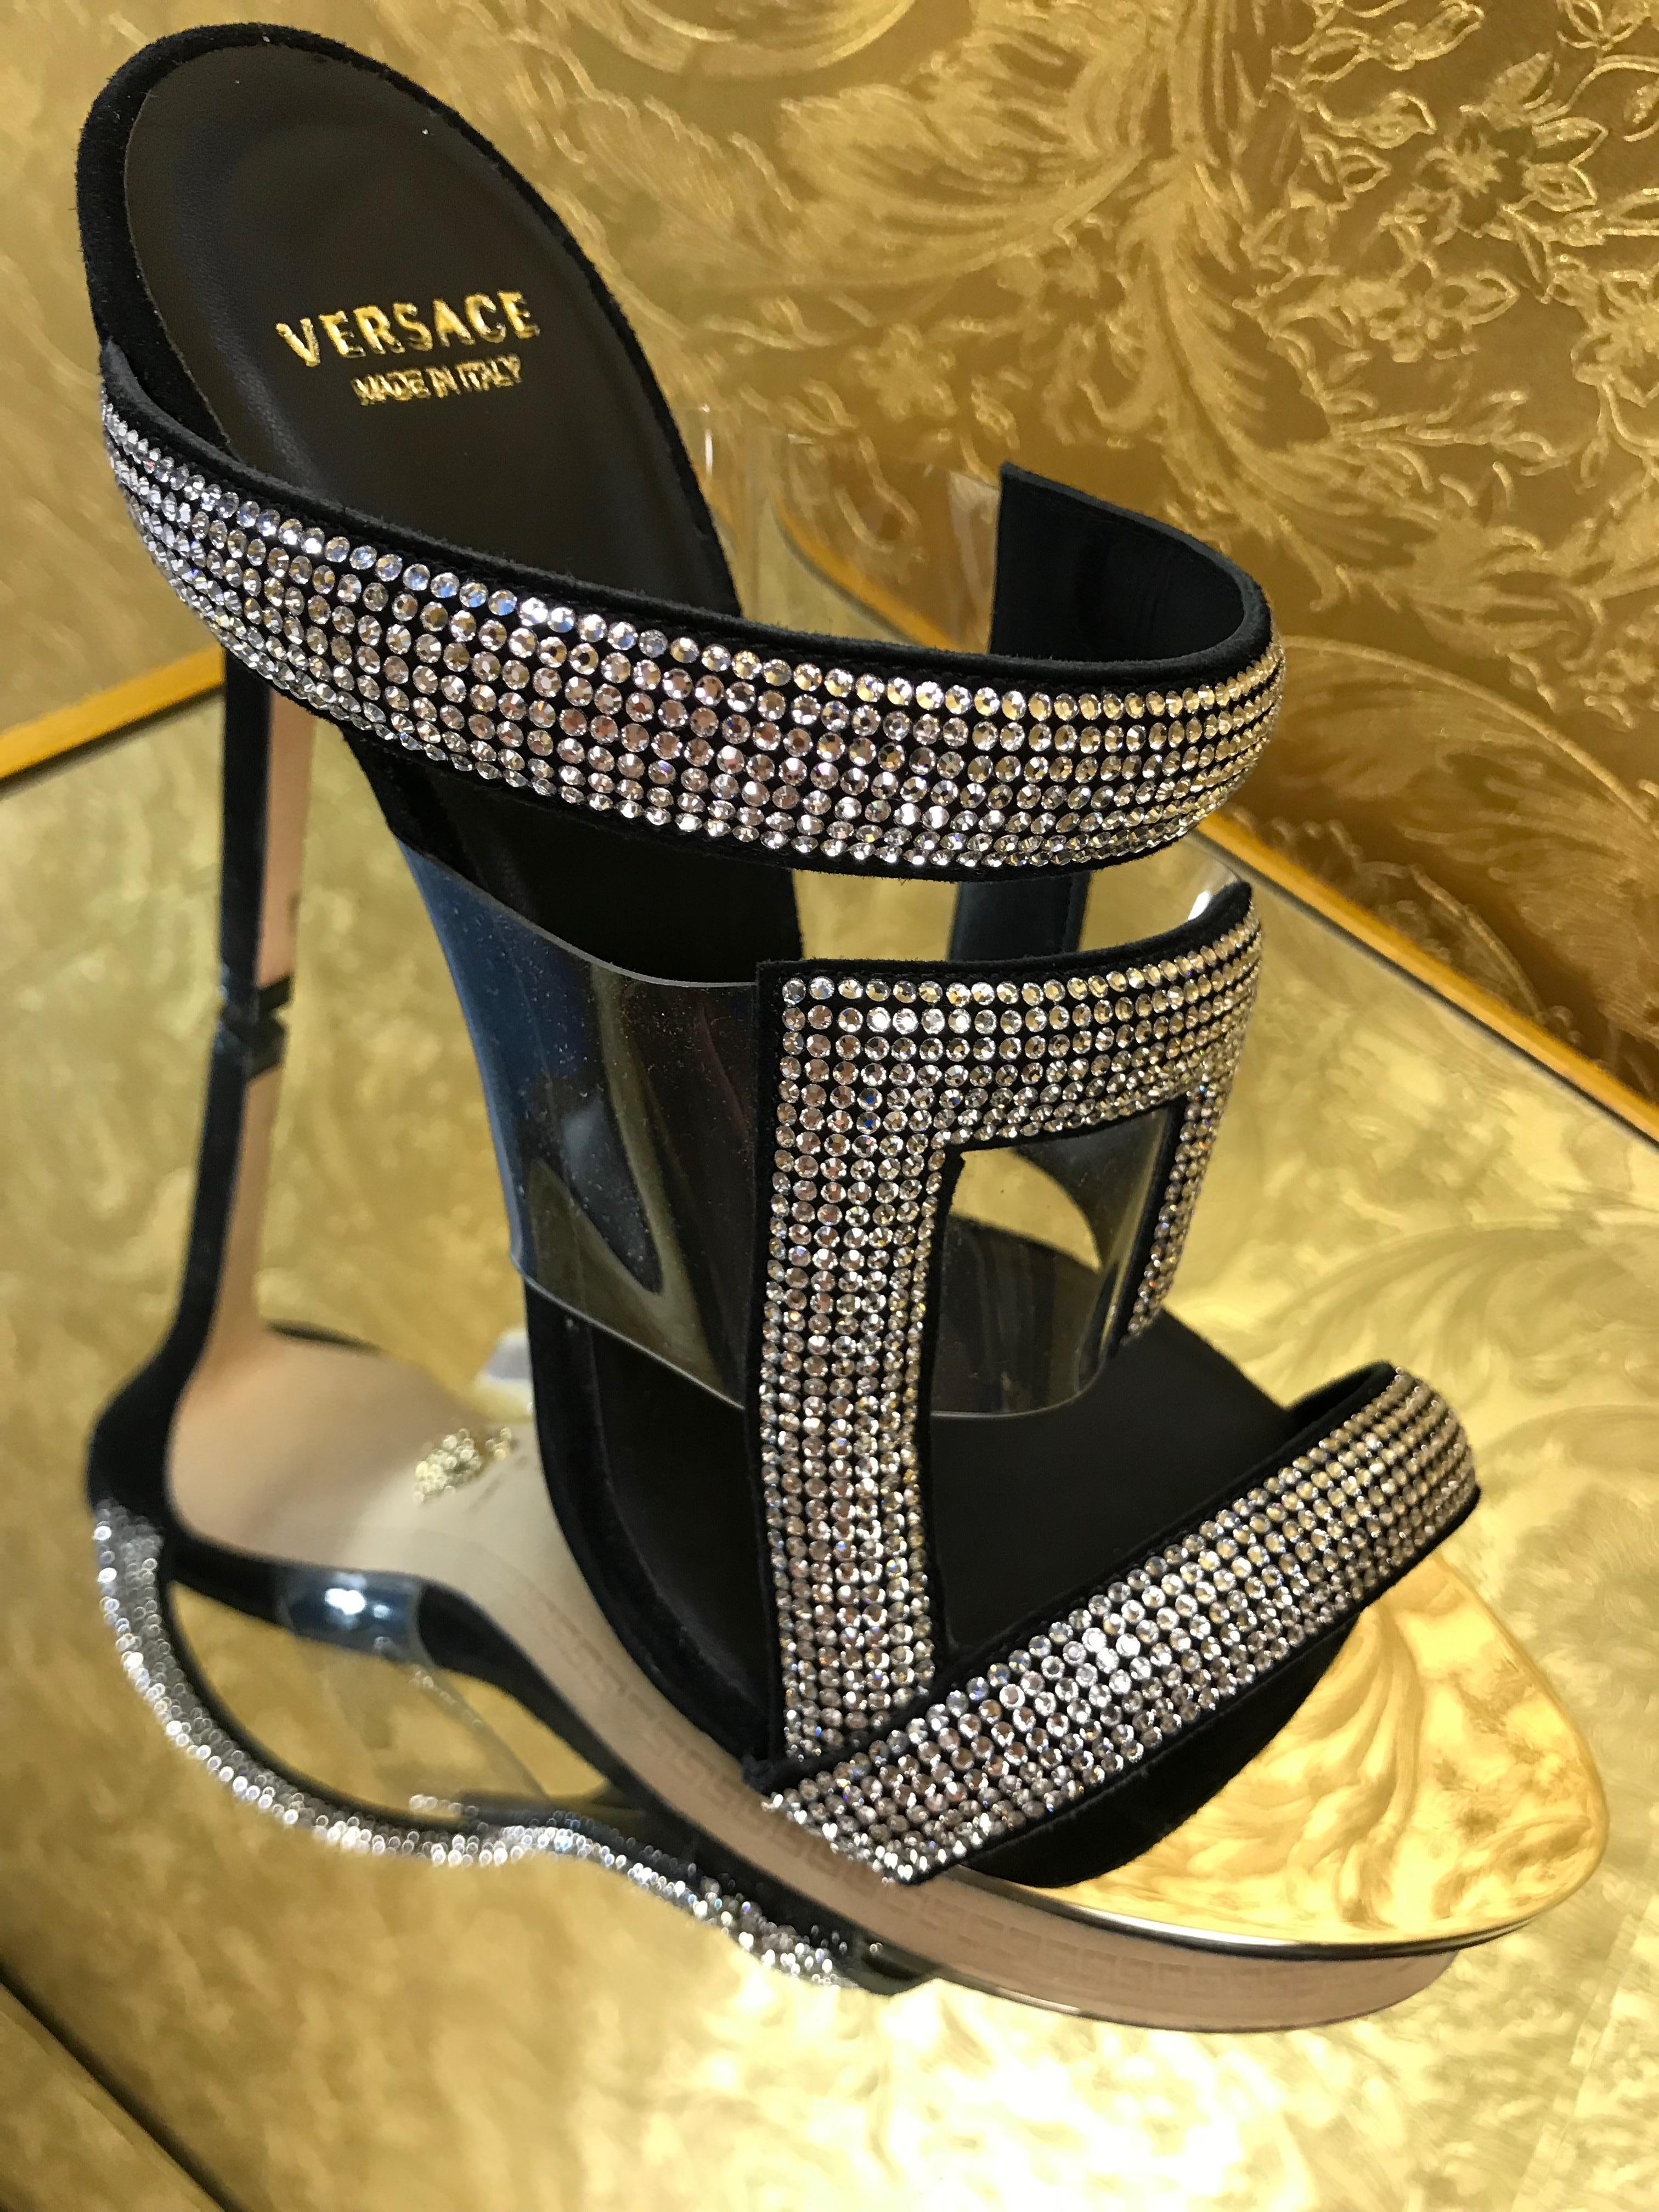 VERSACE 

CLEAR VINYL CRYSTAL EMBELLISHED SANDALS

PVC

Crystals
Mirrored metal toe
Leather lining
Leather sole

Made in Italy
Size is 38 - US 8

Brand New In the box.
 
If you'd like to see live video of these shoes it is available on our Insta